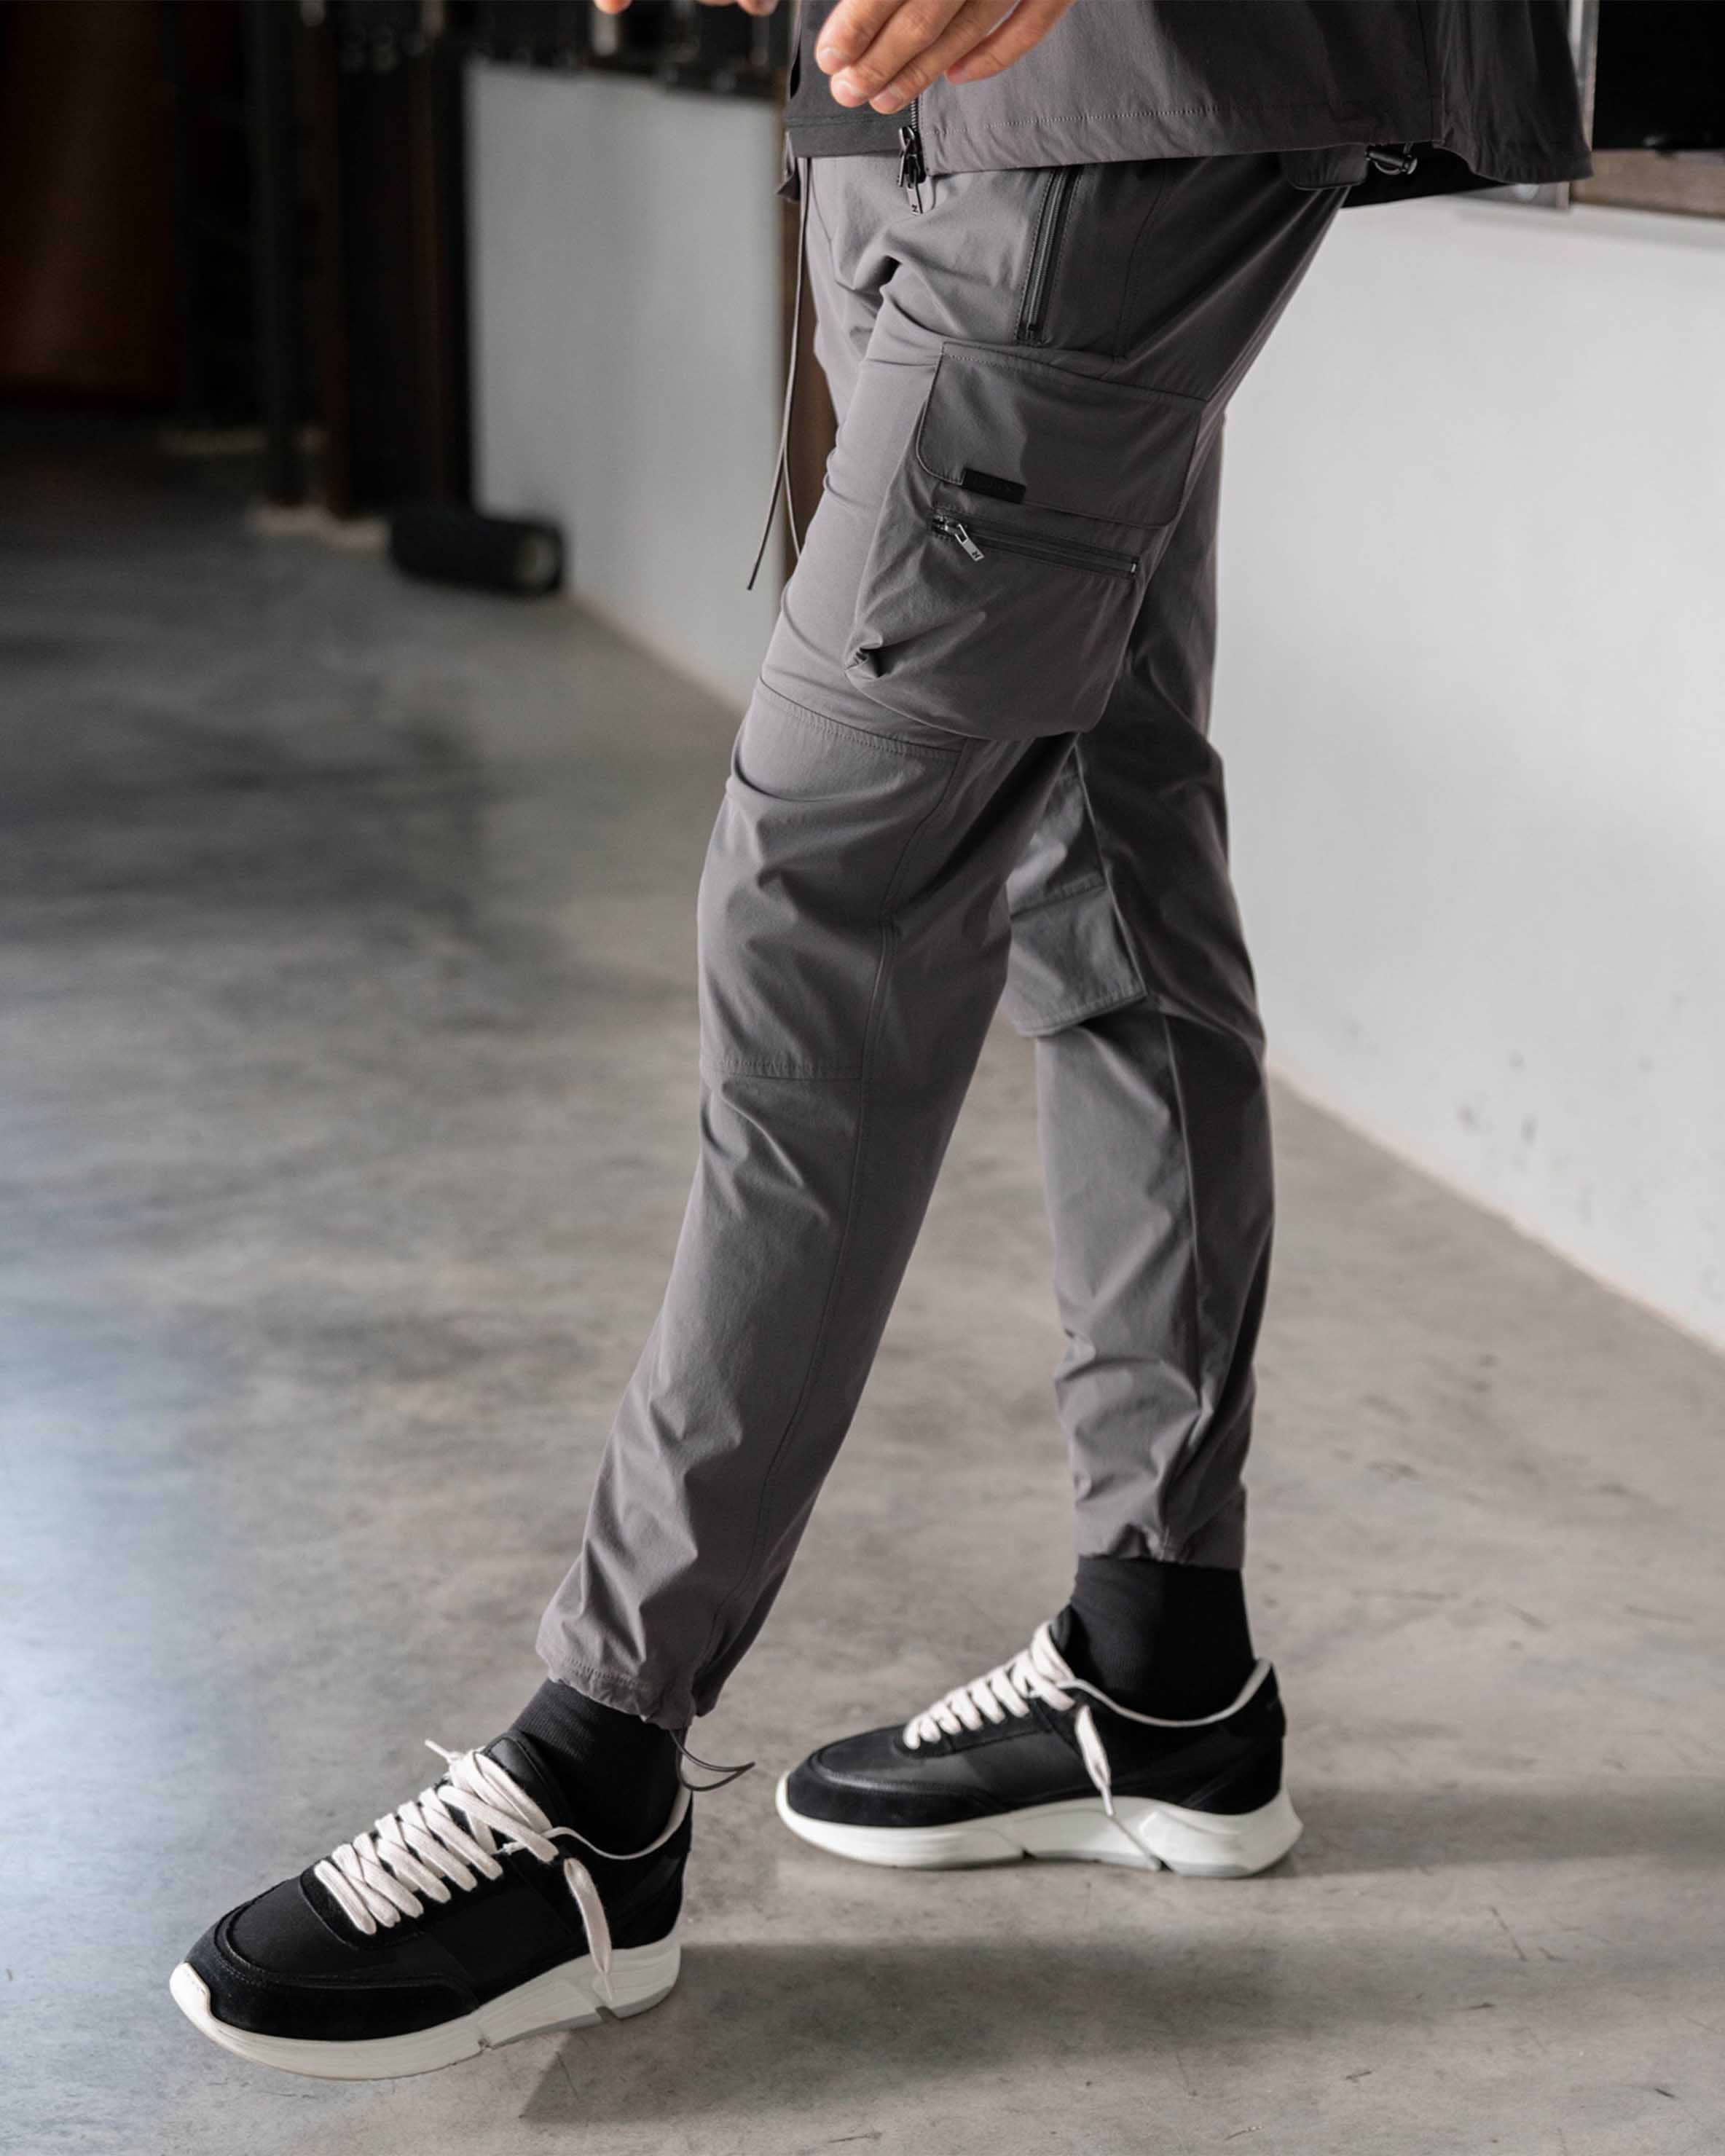 Men's All Day Pant by LAIRD